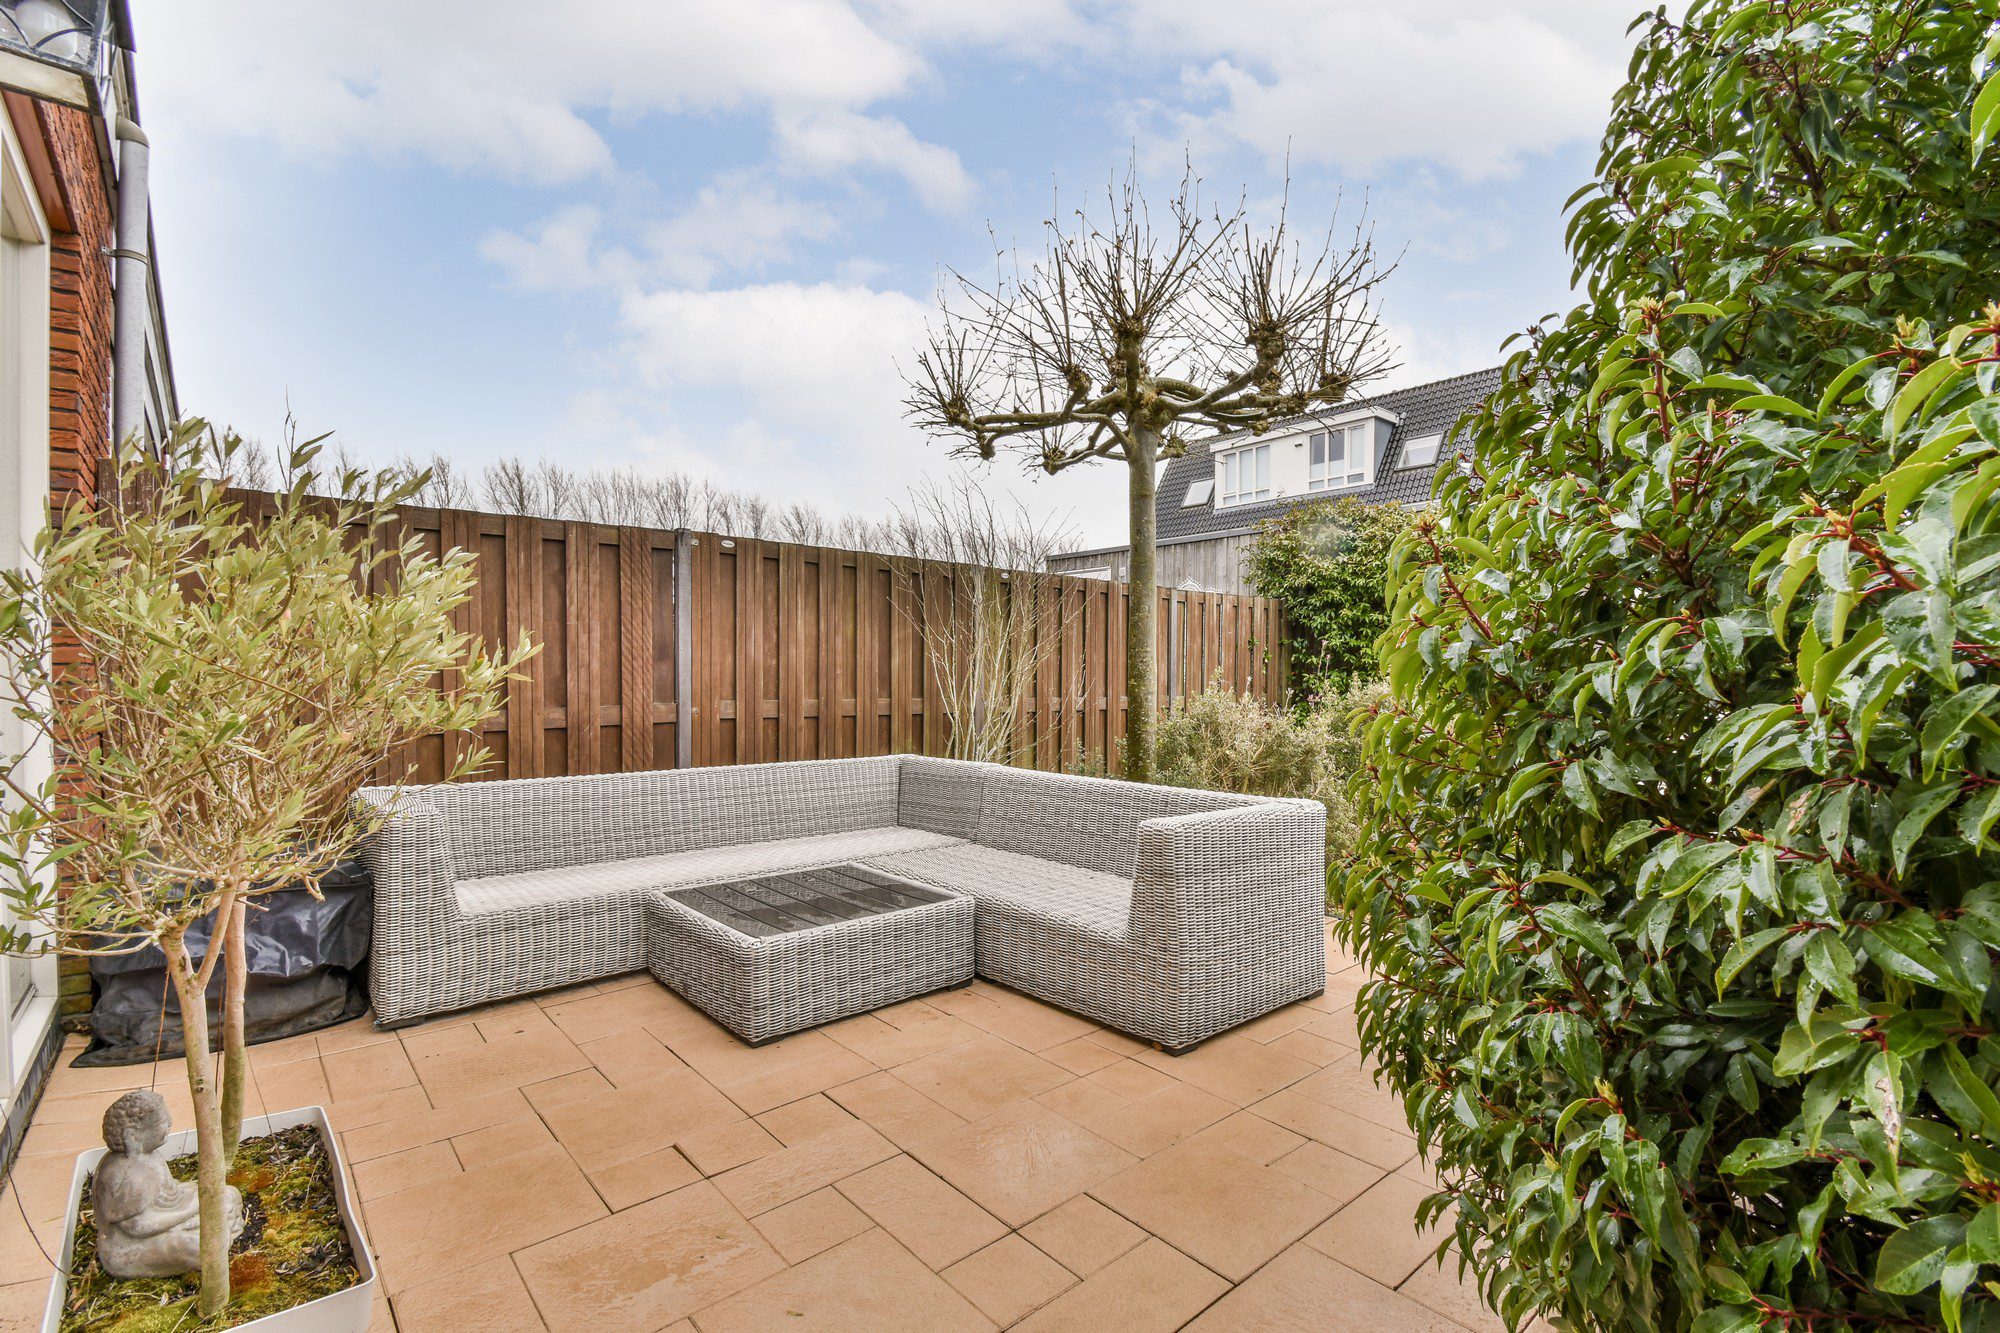 This is an image of a residential garden or patio. In the centre, there's a modern outdoor lounge set made up of a sofa, armchairs, and a low table, all with a matching wicker design. The furniture is placed on a tiled patio area.To the left, there's a small tree in a pot, and behind it, a statue of what appears to be a sitting figure, possibly a representation of a Buddha. The background shows a wooden fence that appears to be providing privacy for the area. Another leafless tree can be seen behind the seating area, indicating it might be late fall or winter.To the right, there's a large, lush green bush with glossy leaves, which adds a vibrant touch of greenery to the scene. The sky suggests it could be a cloudy day, and the overall impression is of a tidy, well-maintained outdoor space designed for relaxation.